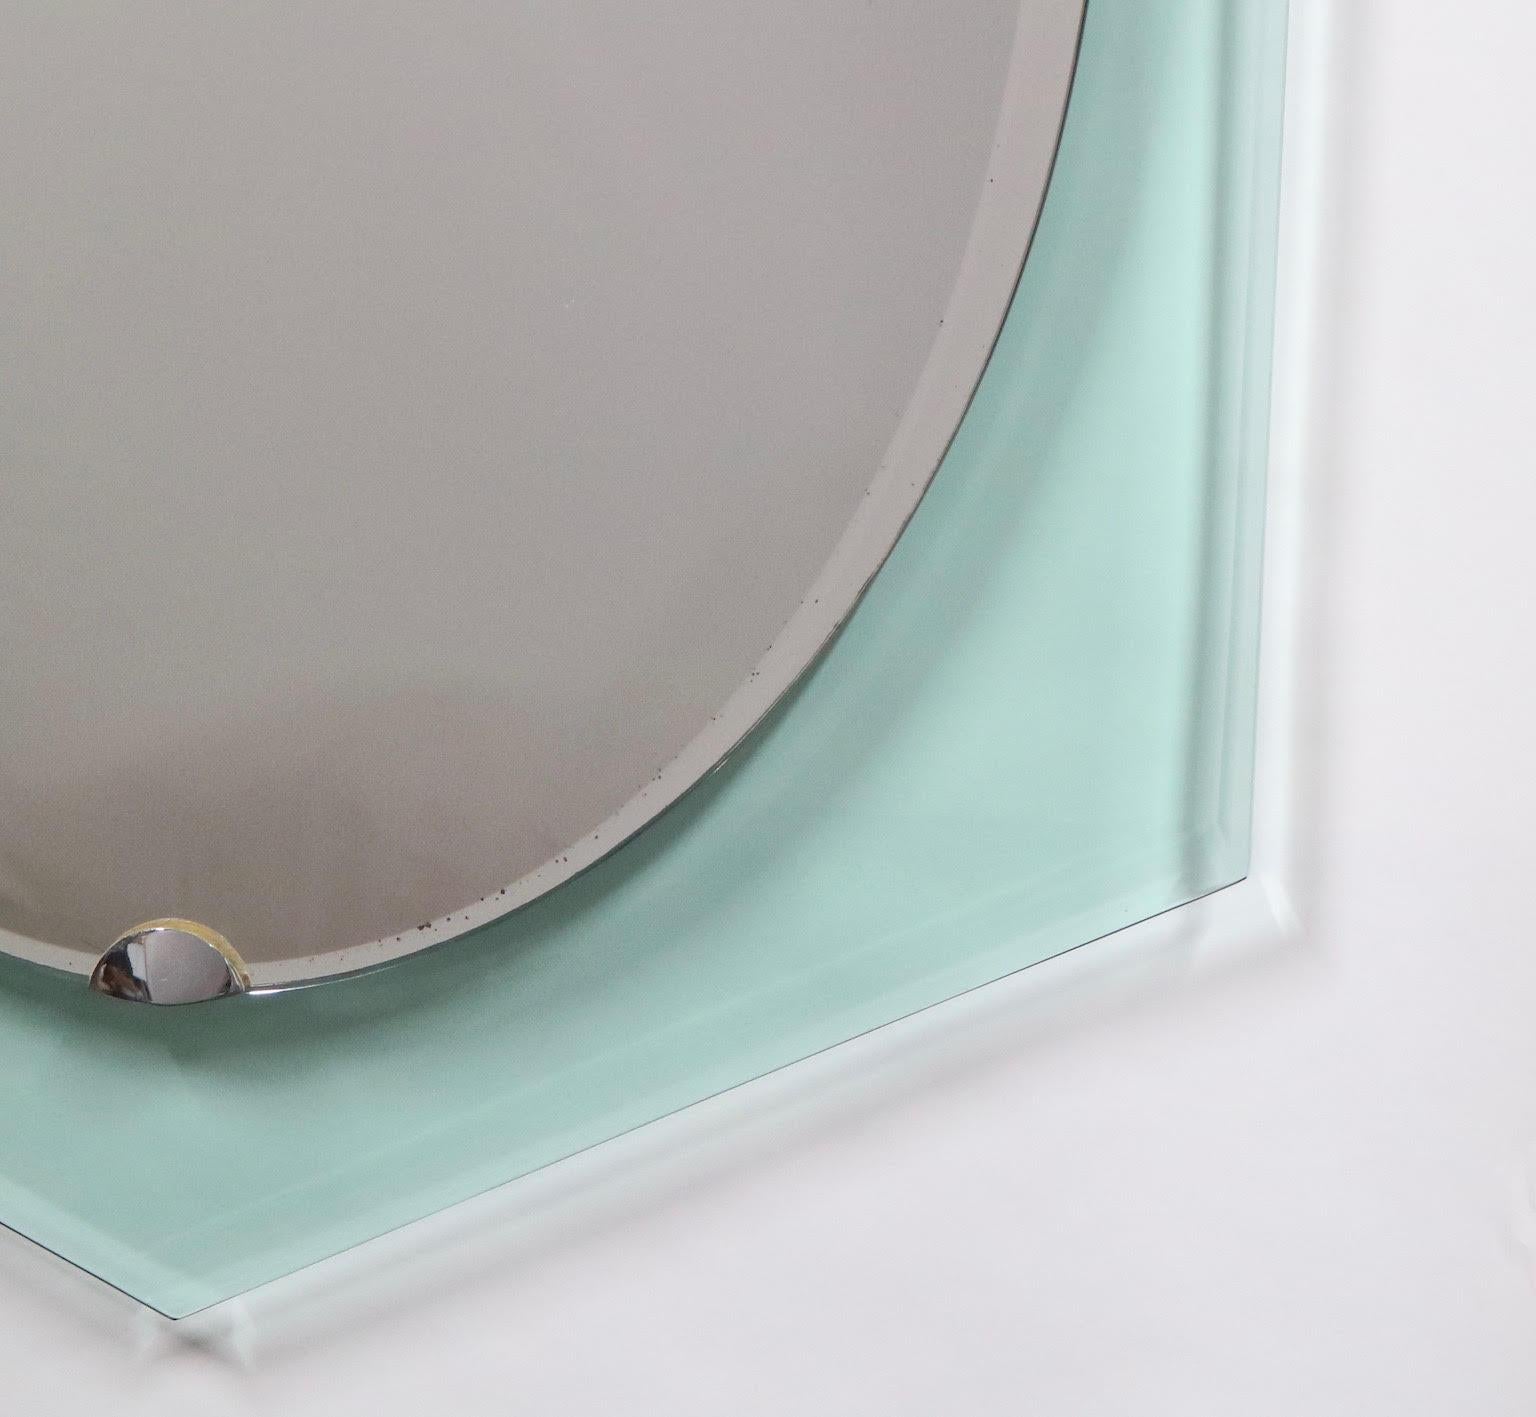 Italian midcentury mirror designed by Fontana Arte during the 1940s. The mirror is suspended on top of a clear/green beveled glass surface. The edges of the mirror are asymmetrical, with its middle parts more dipped. In very good vintage condition